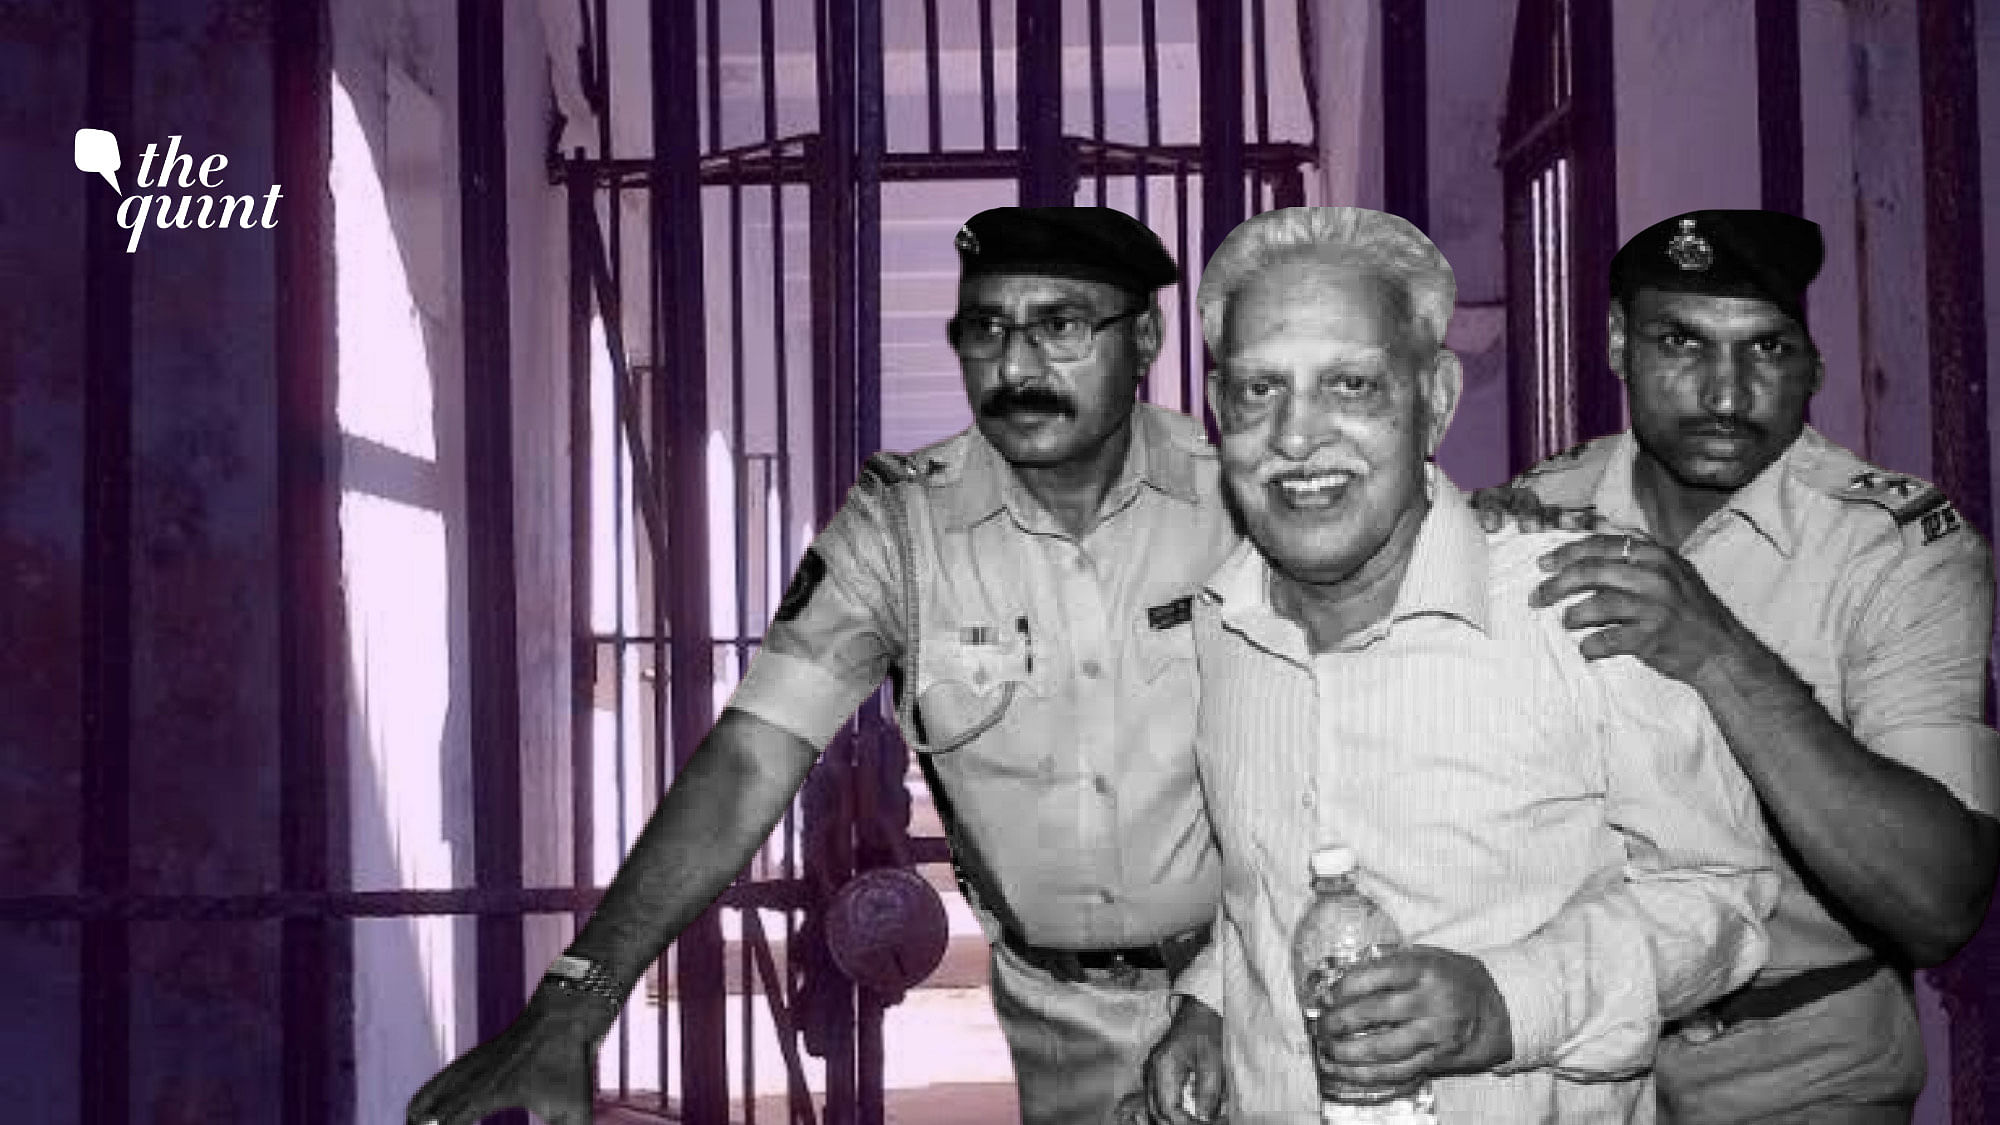 Varavara Rao was charged under the UAPA and arrested in November 2018.